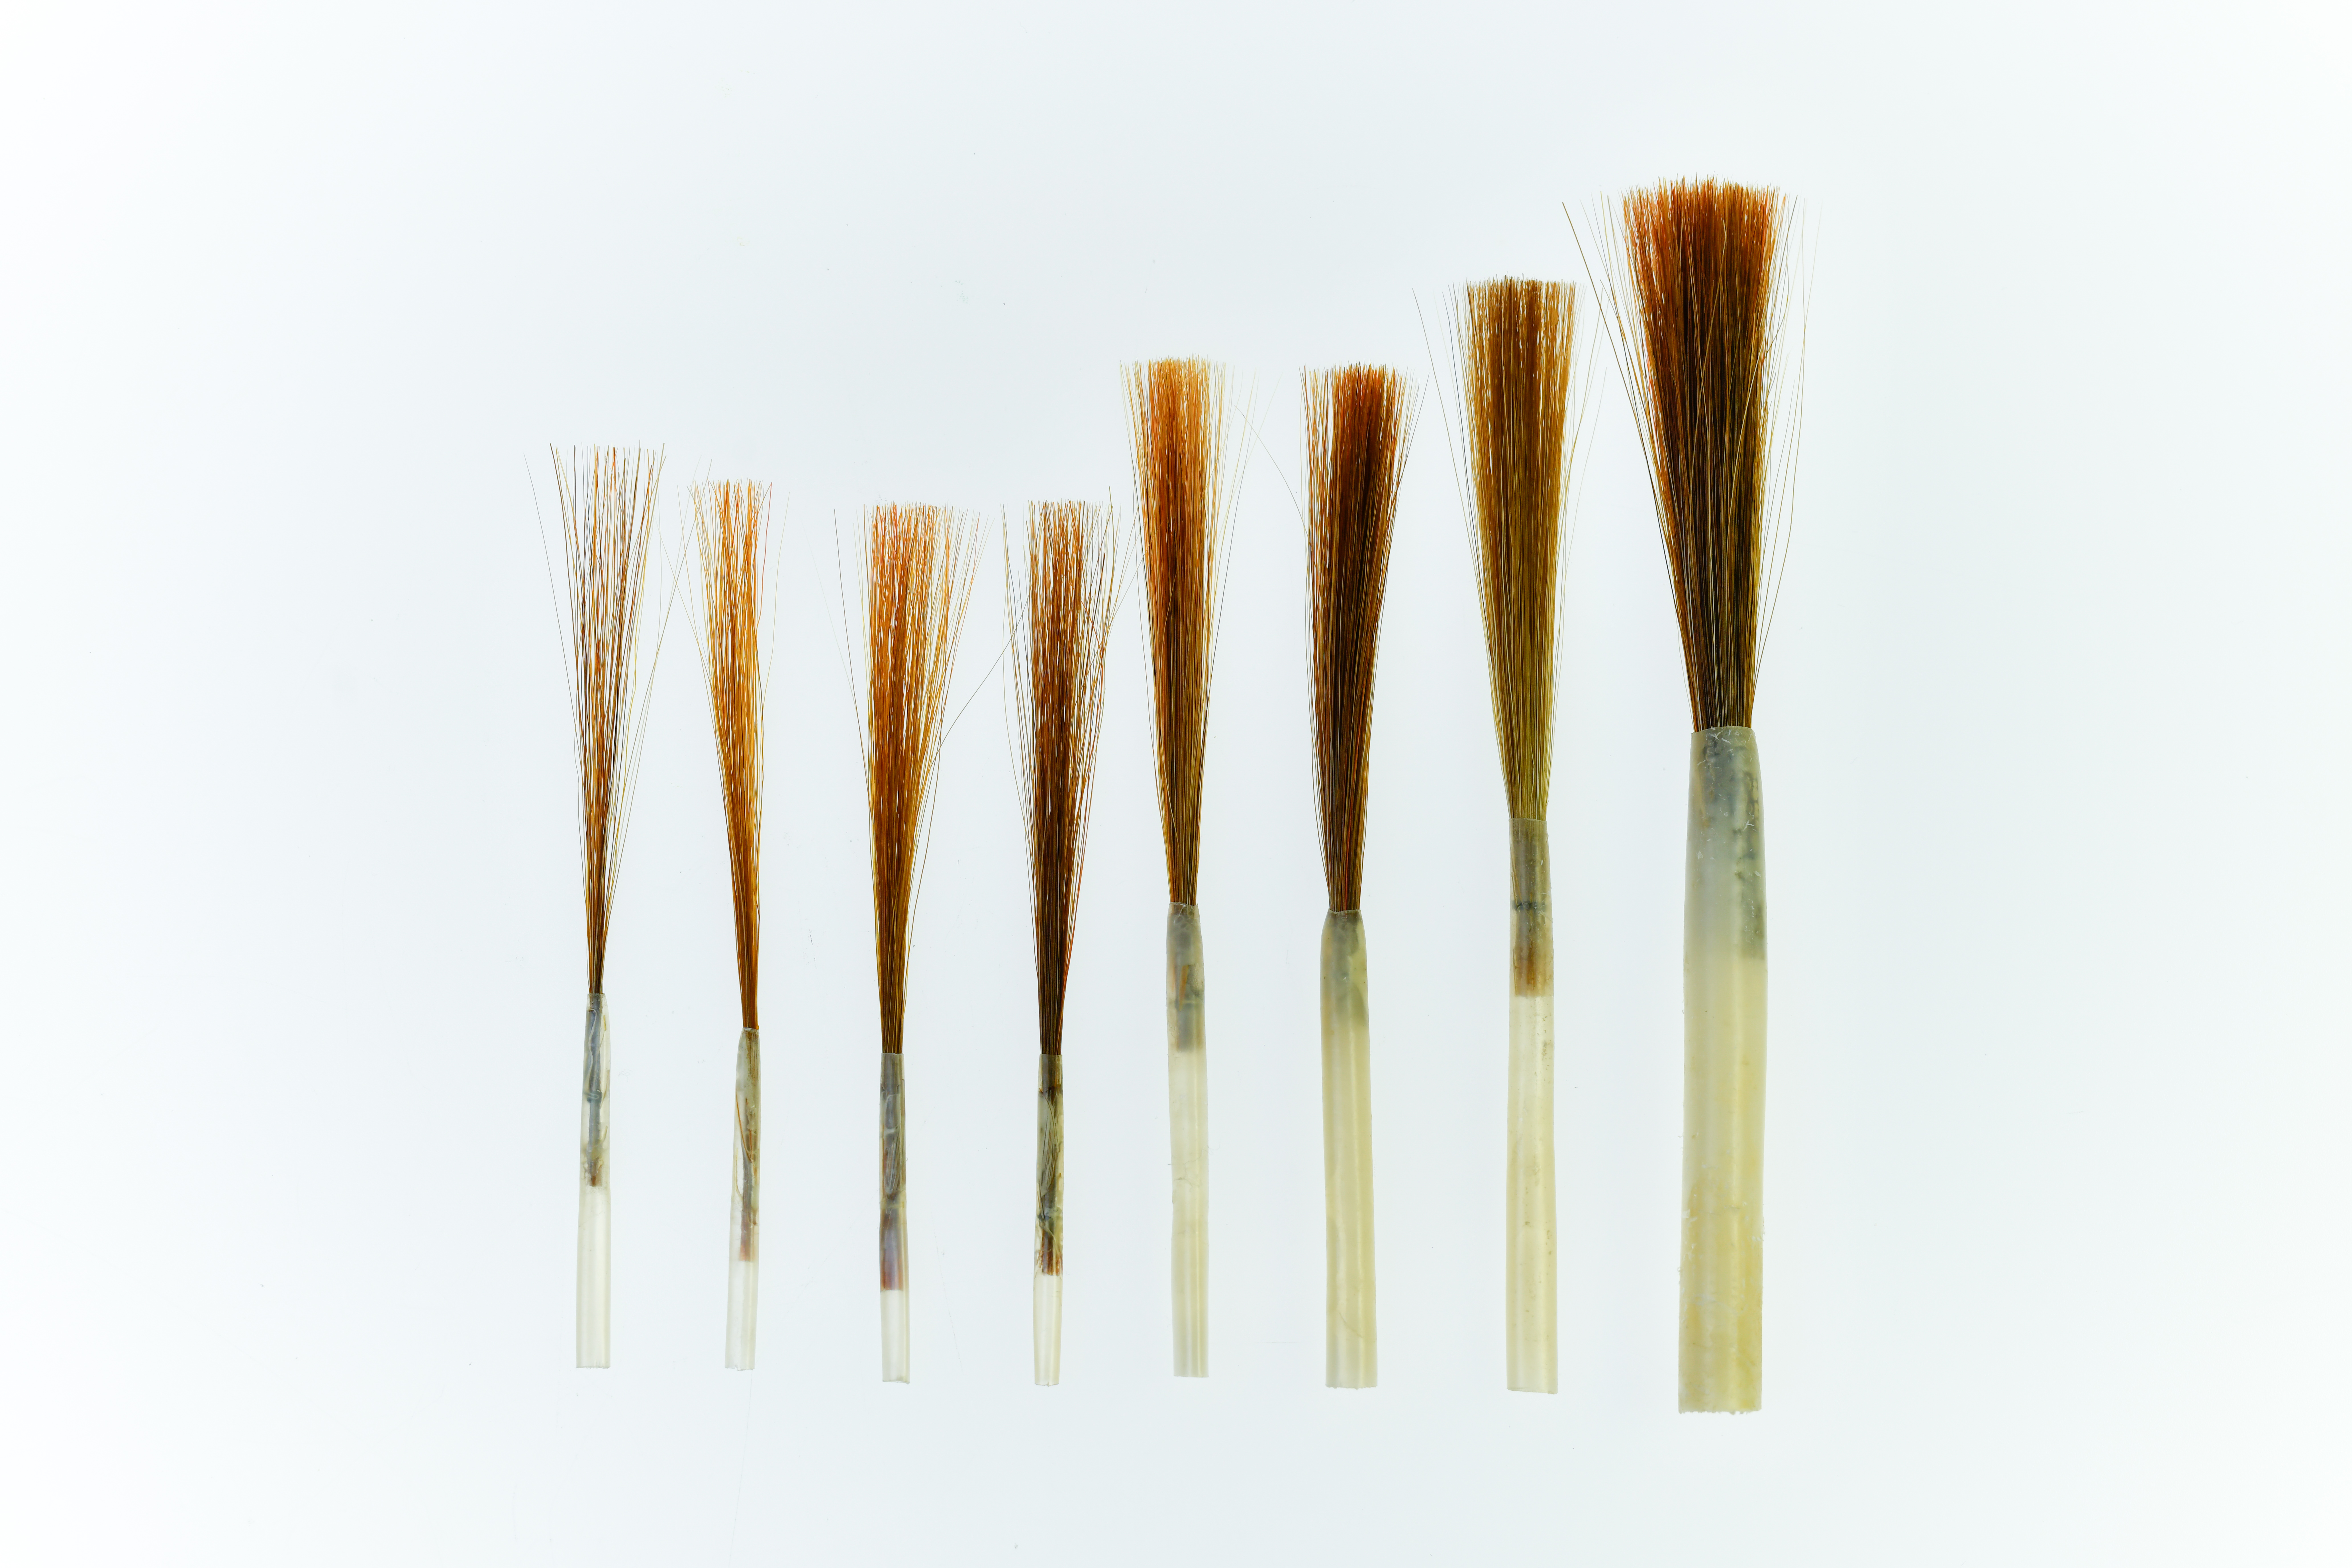 Series 1249 Ox Hair Liners in Quill